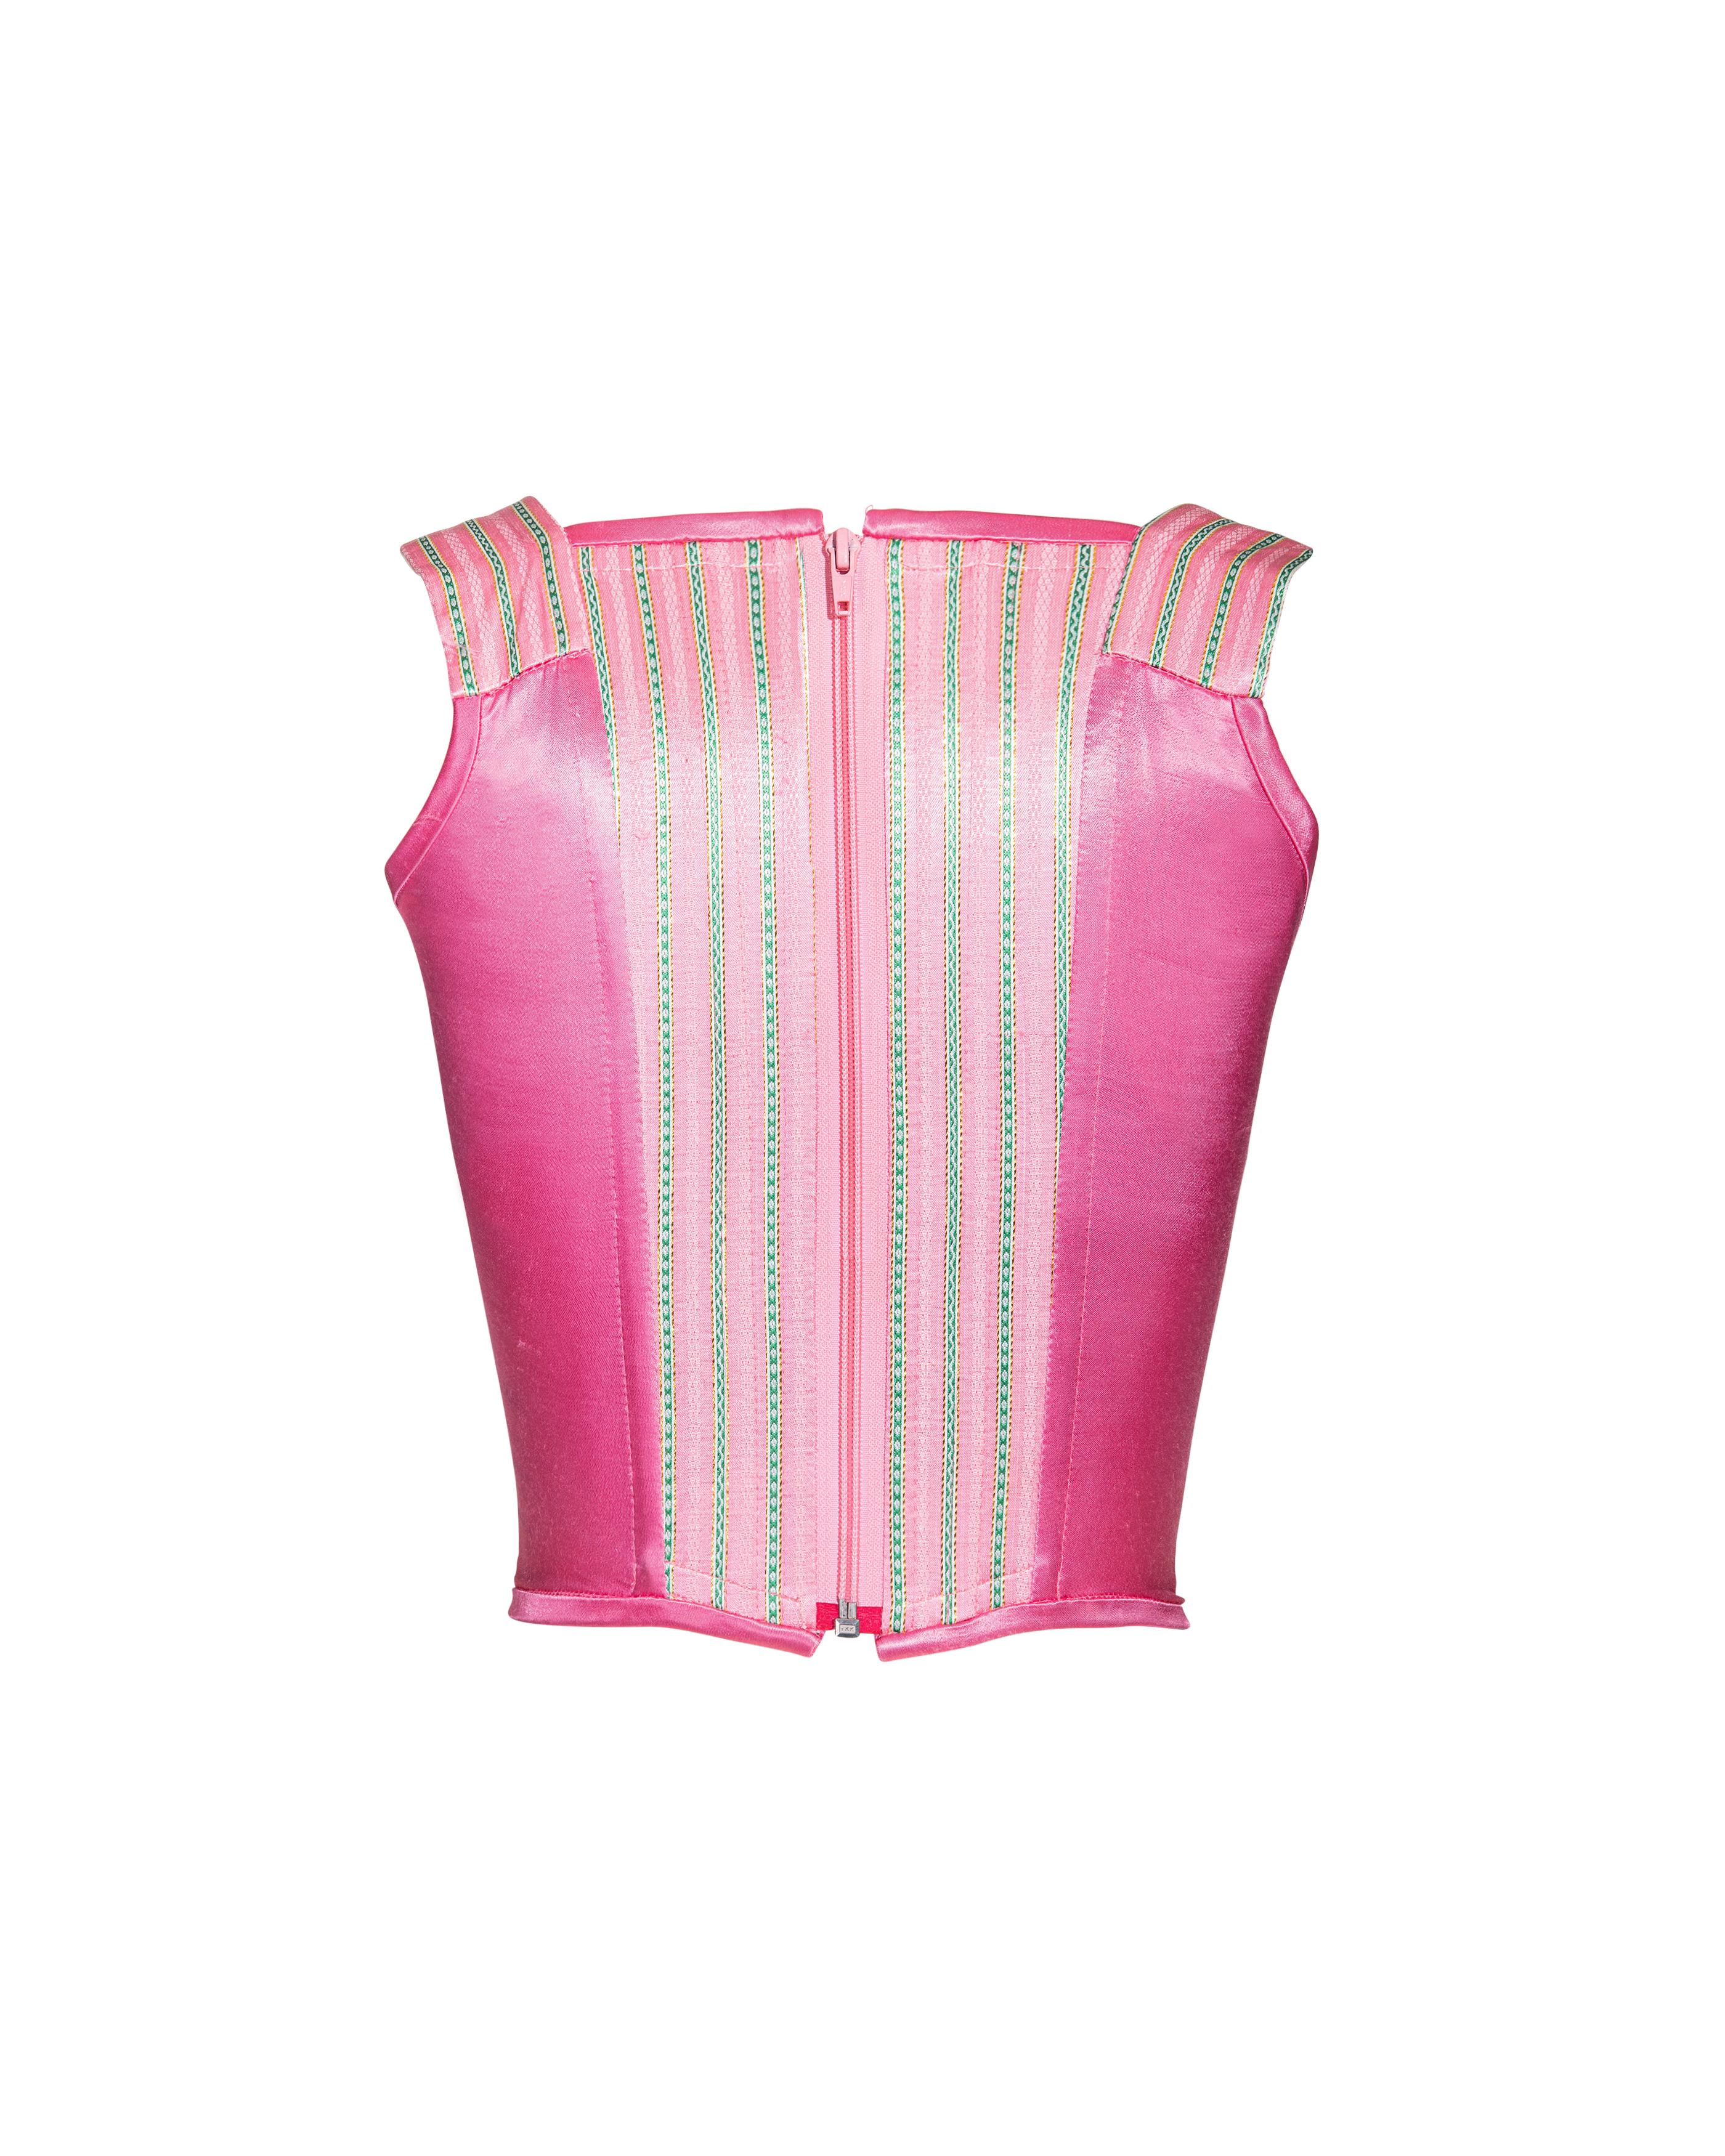 A/W 1991 Vivienne Westwood 'Dressing Up' Pink and Green Striped Corset For Sale 1